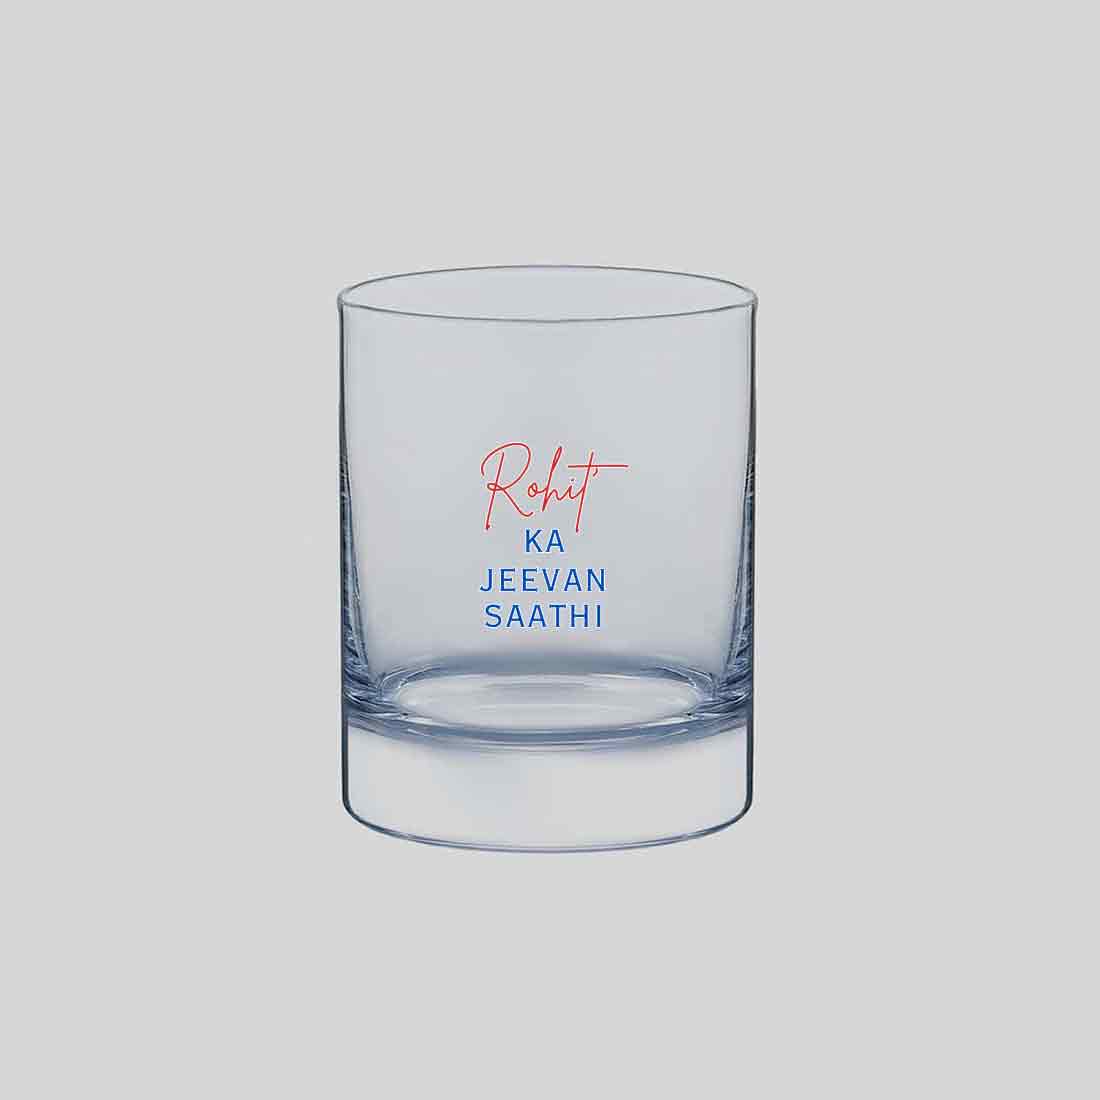 Personalized Glass of Whiskey - Color Printed Glasses for Alcohol